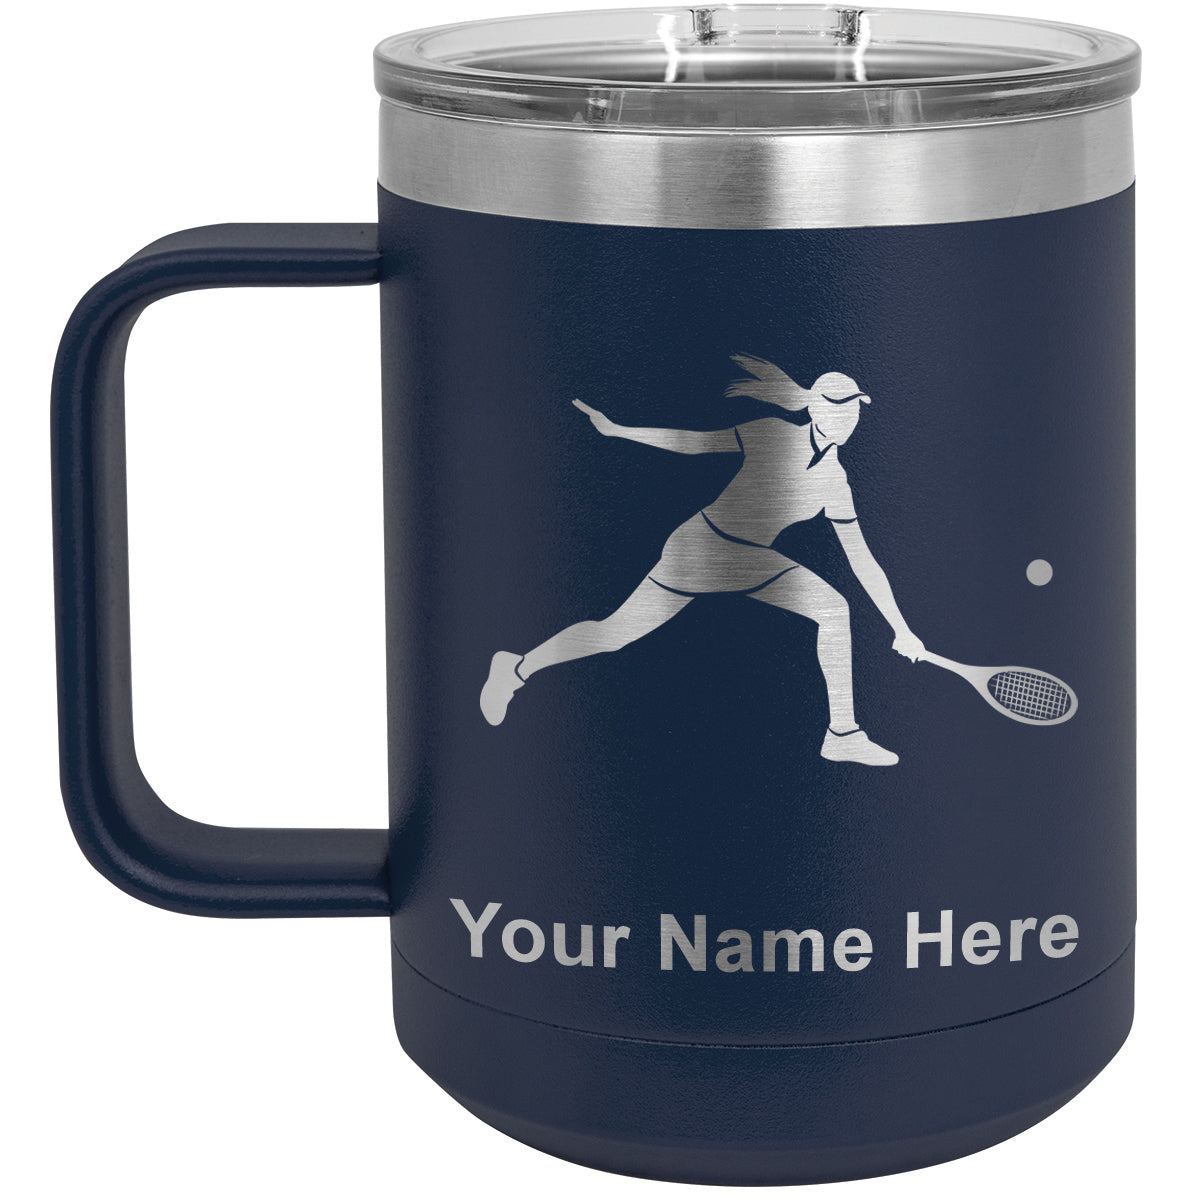 15oz Vacuum Insulated Coffee Mug, Tennis Player Woman, Personalized Engraving Included